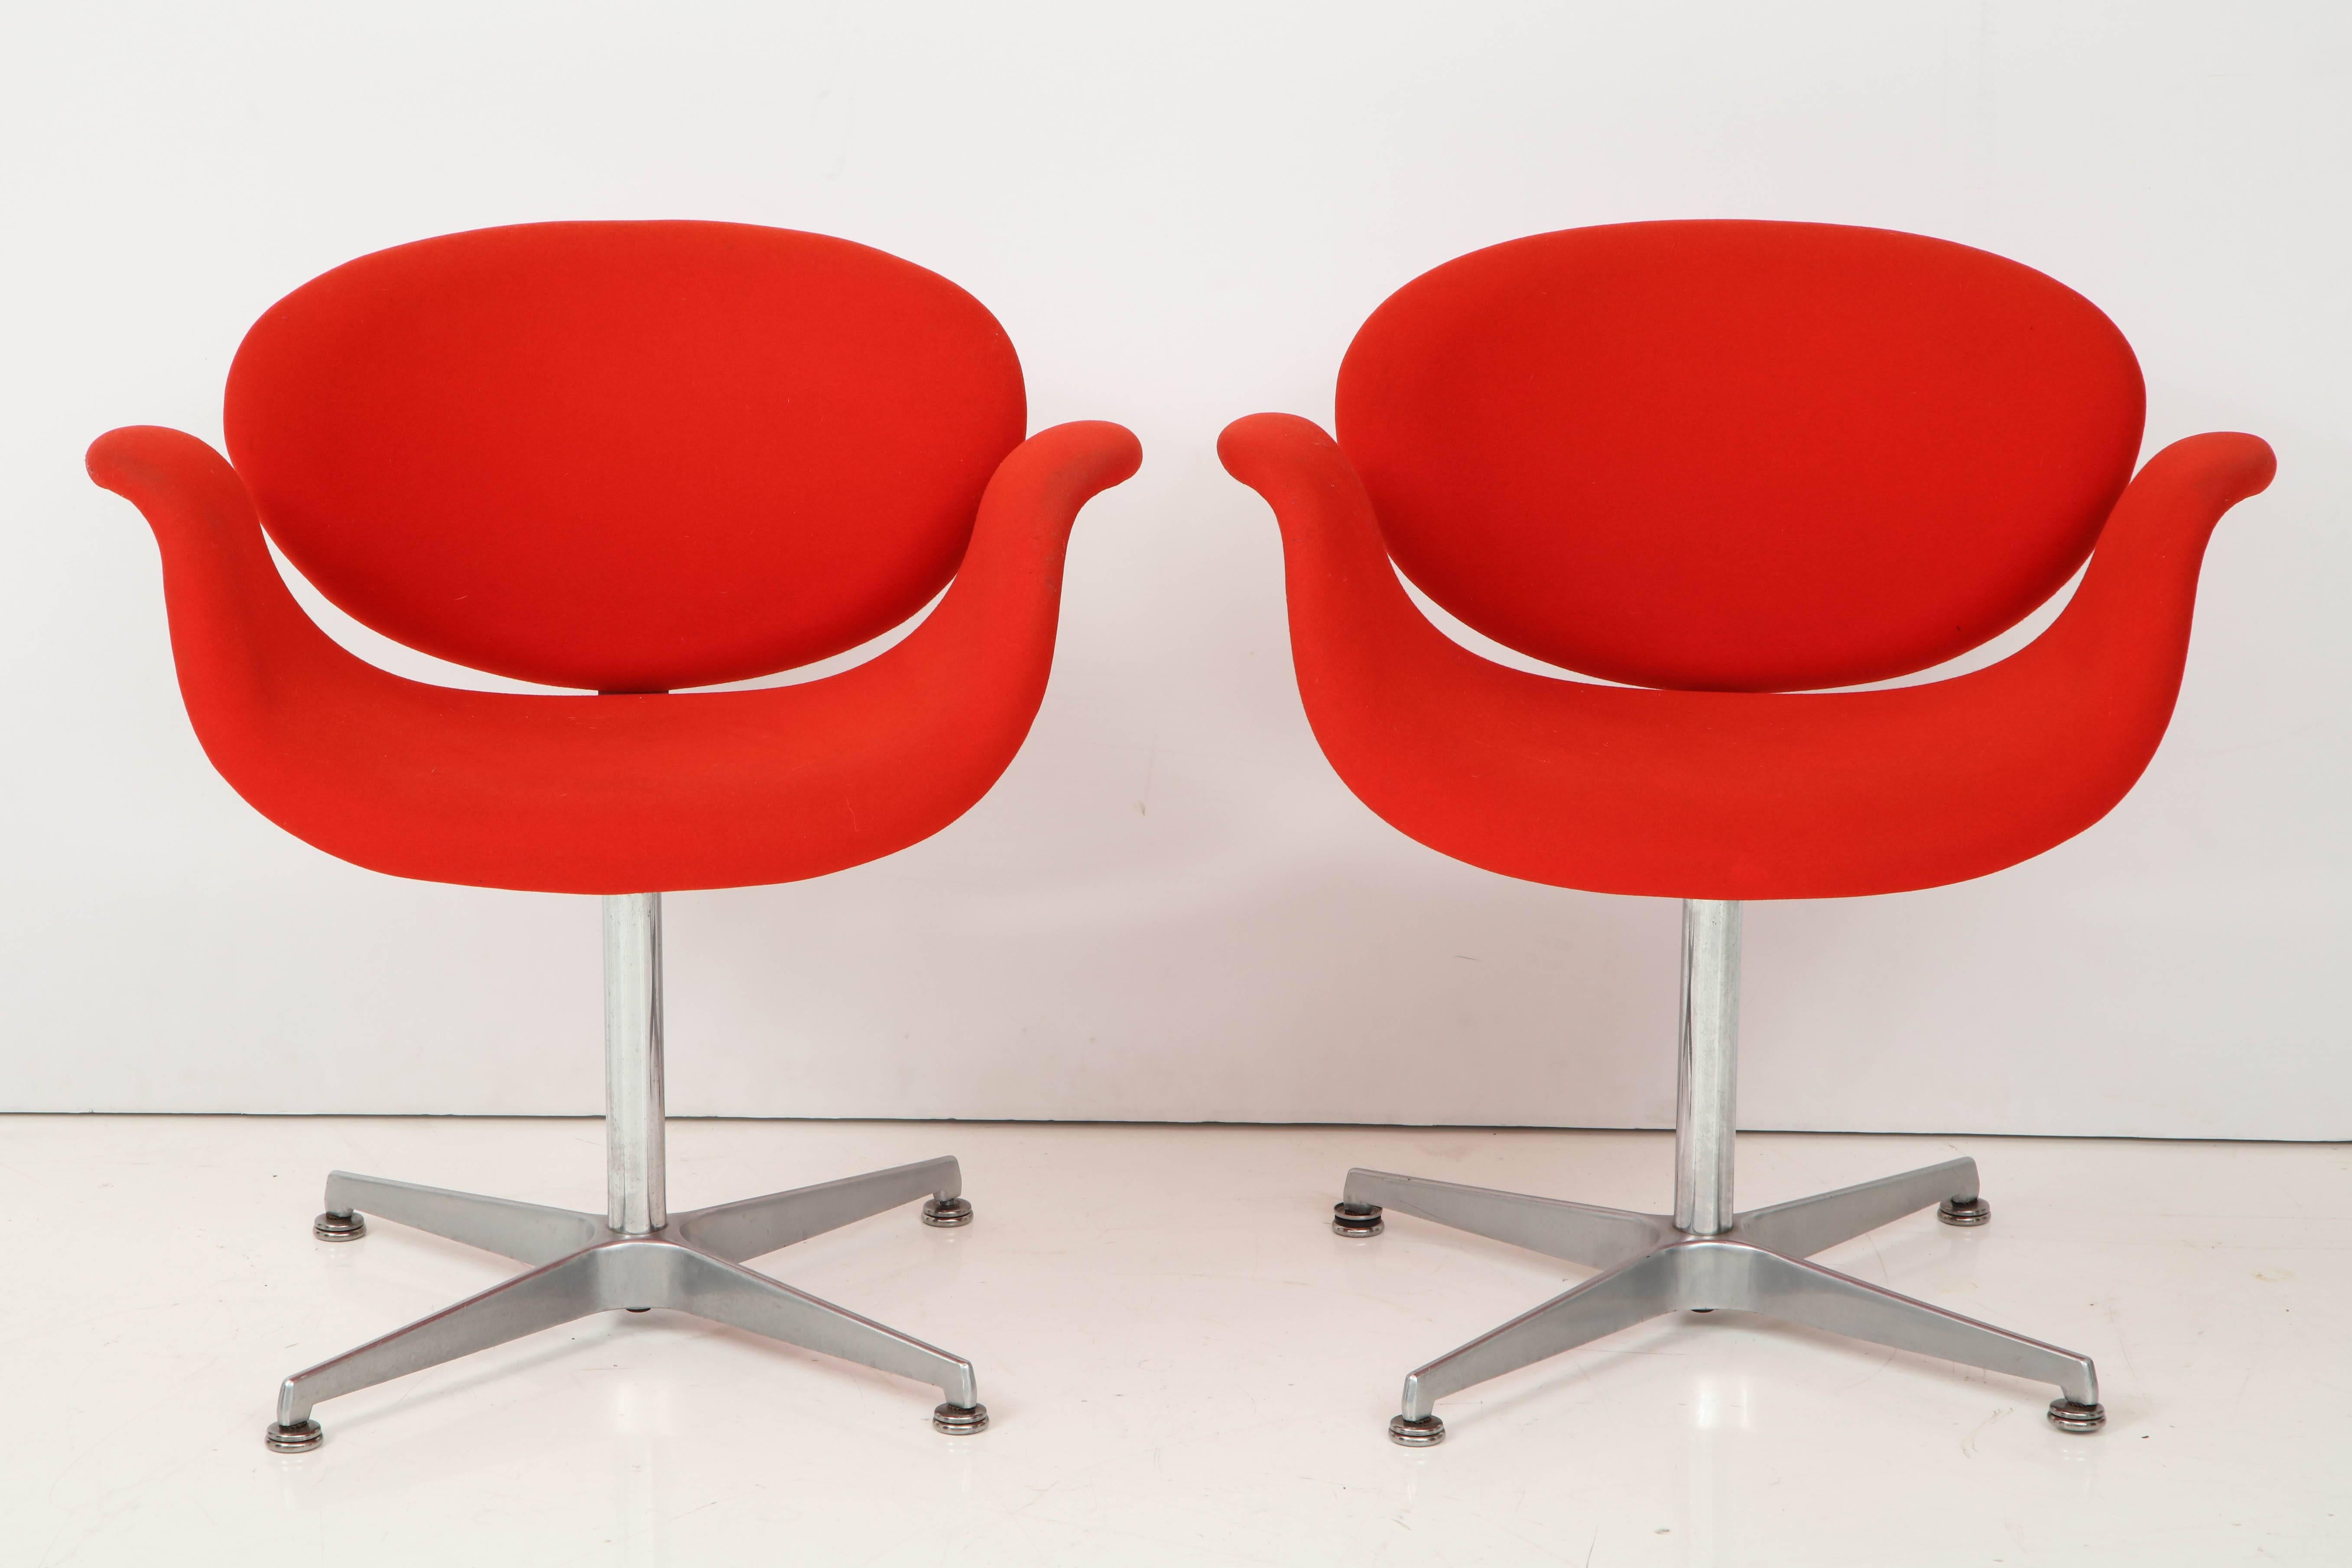 Early pair of Pierre Paulin Tulip chairs for Artifort.
The chairs are in wonderful condition with the original red upholstery and the Artifact labels underneath.